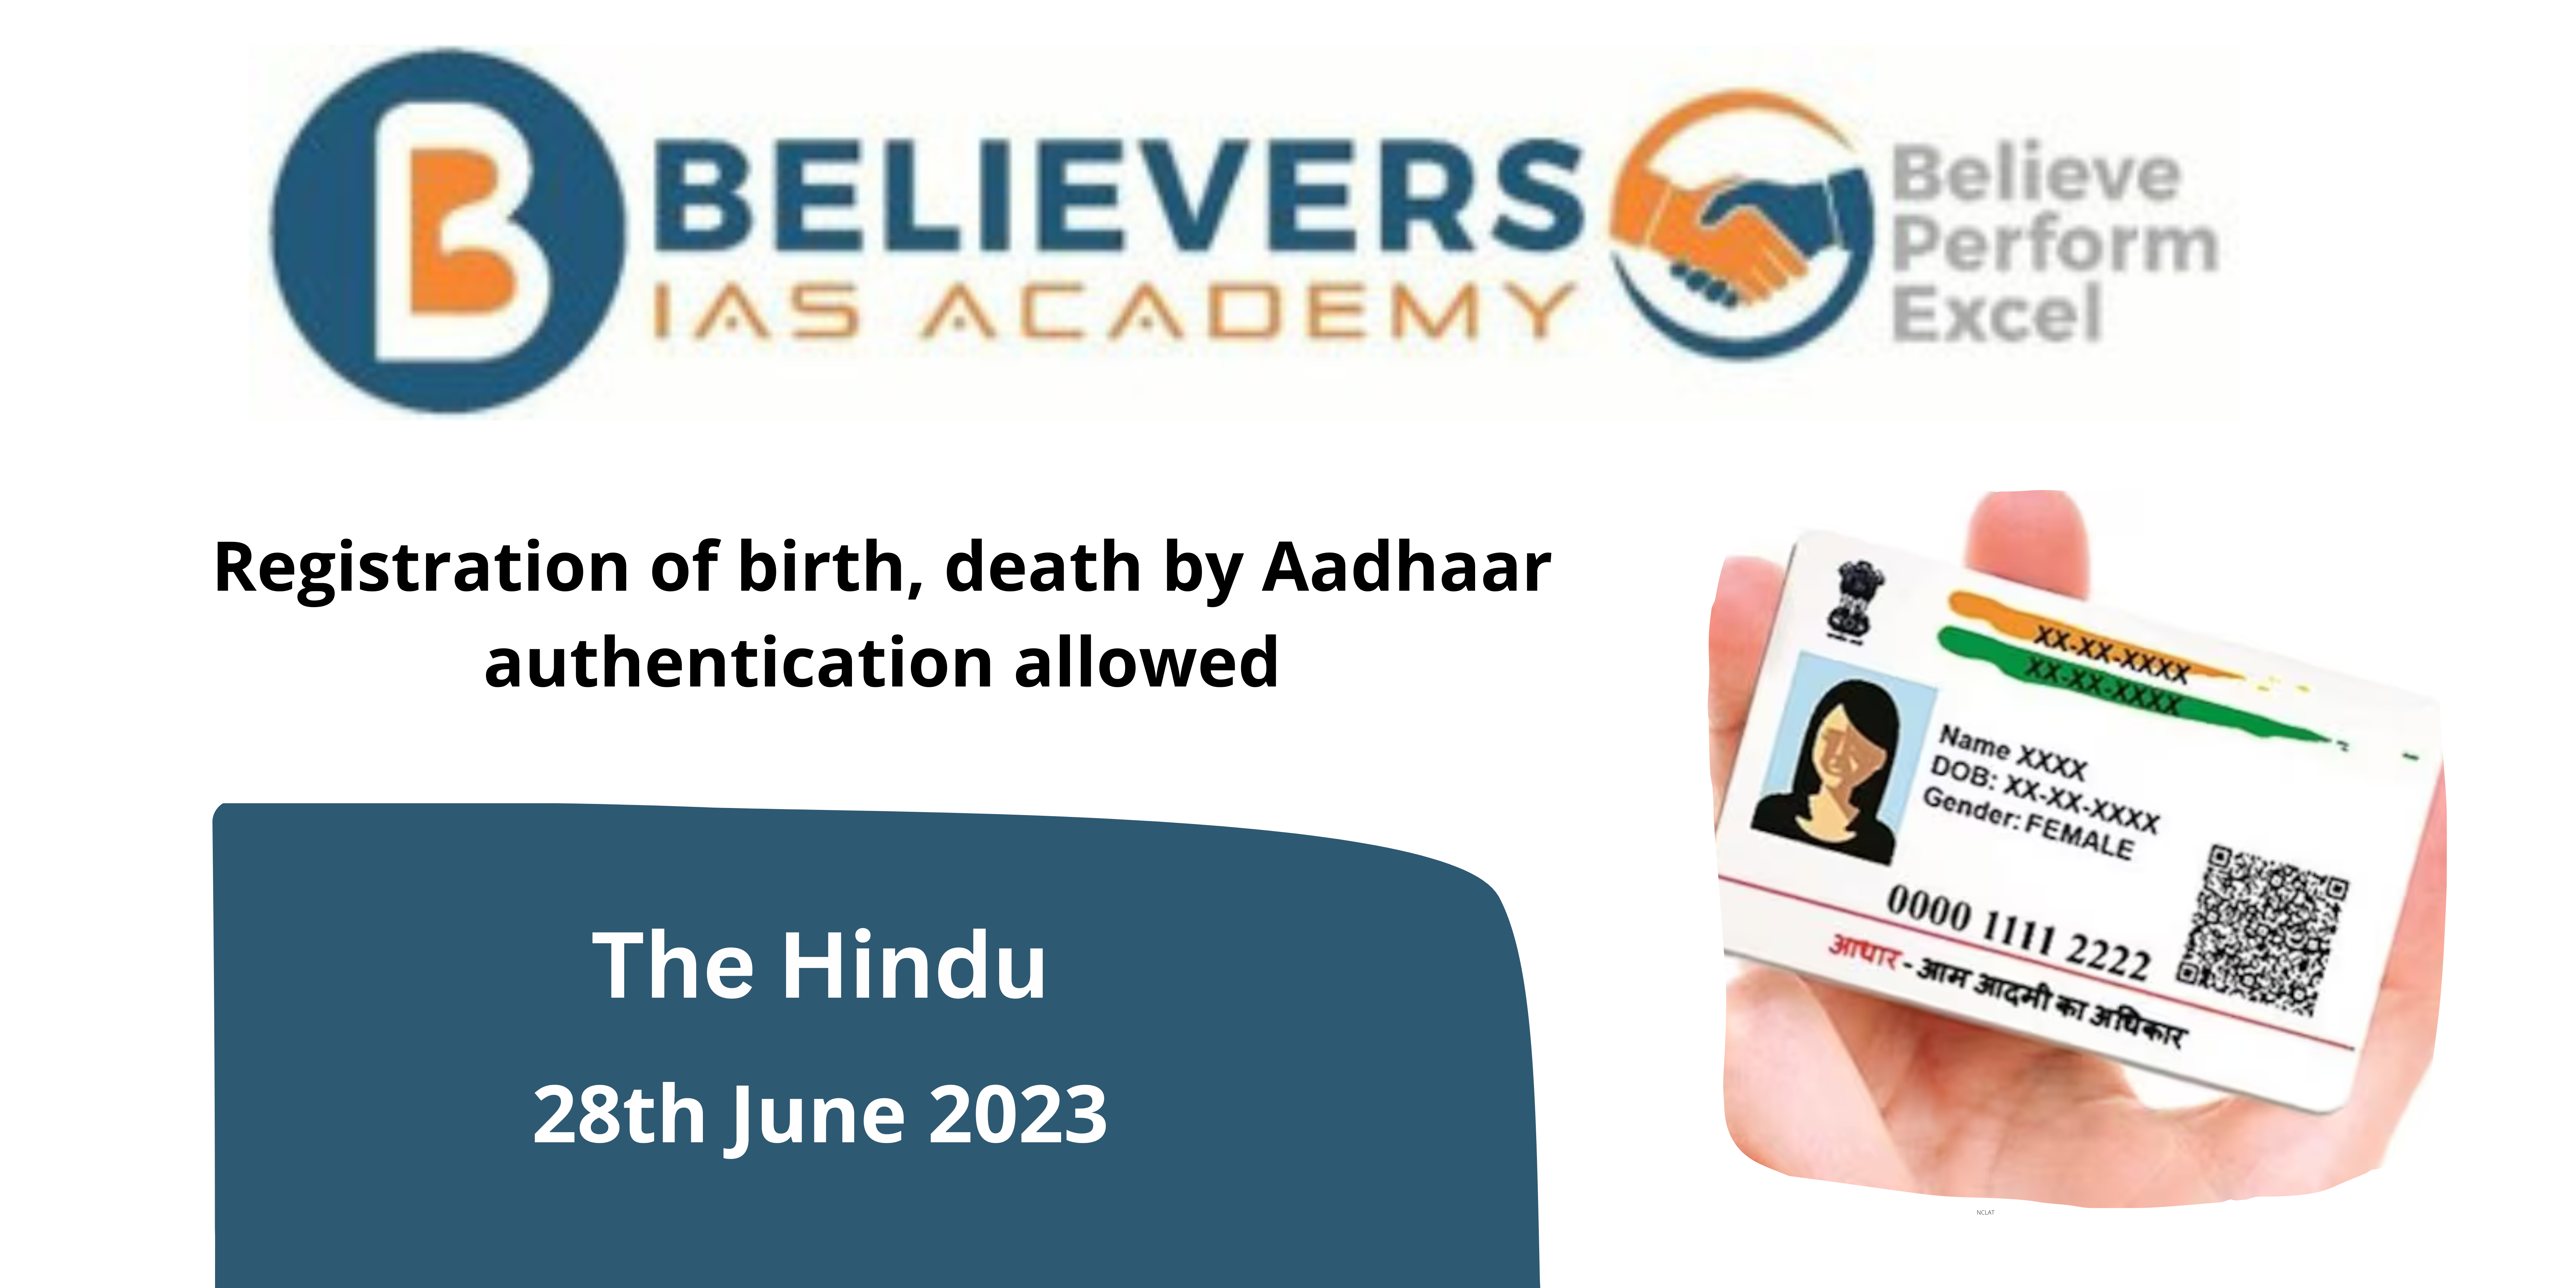 Registration of birth, death by Aadhaar authentication allowed